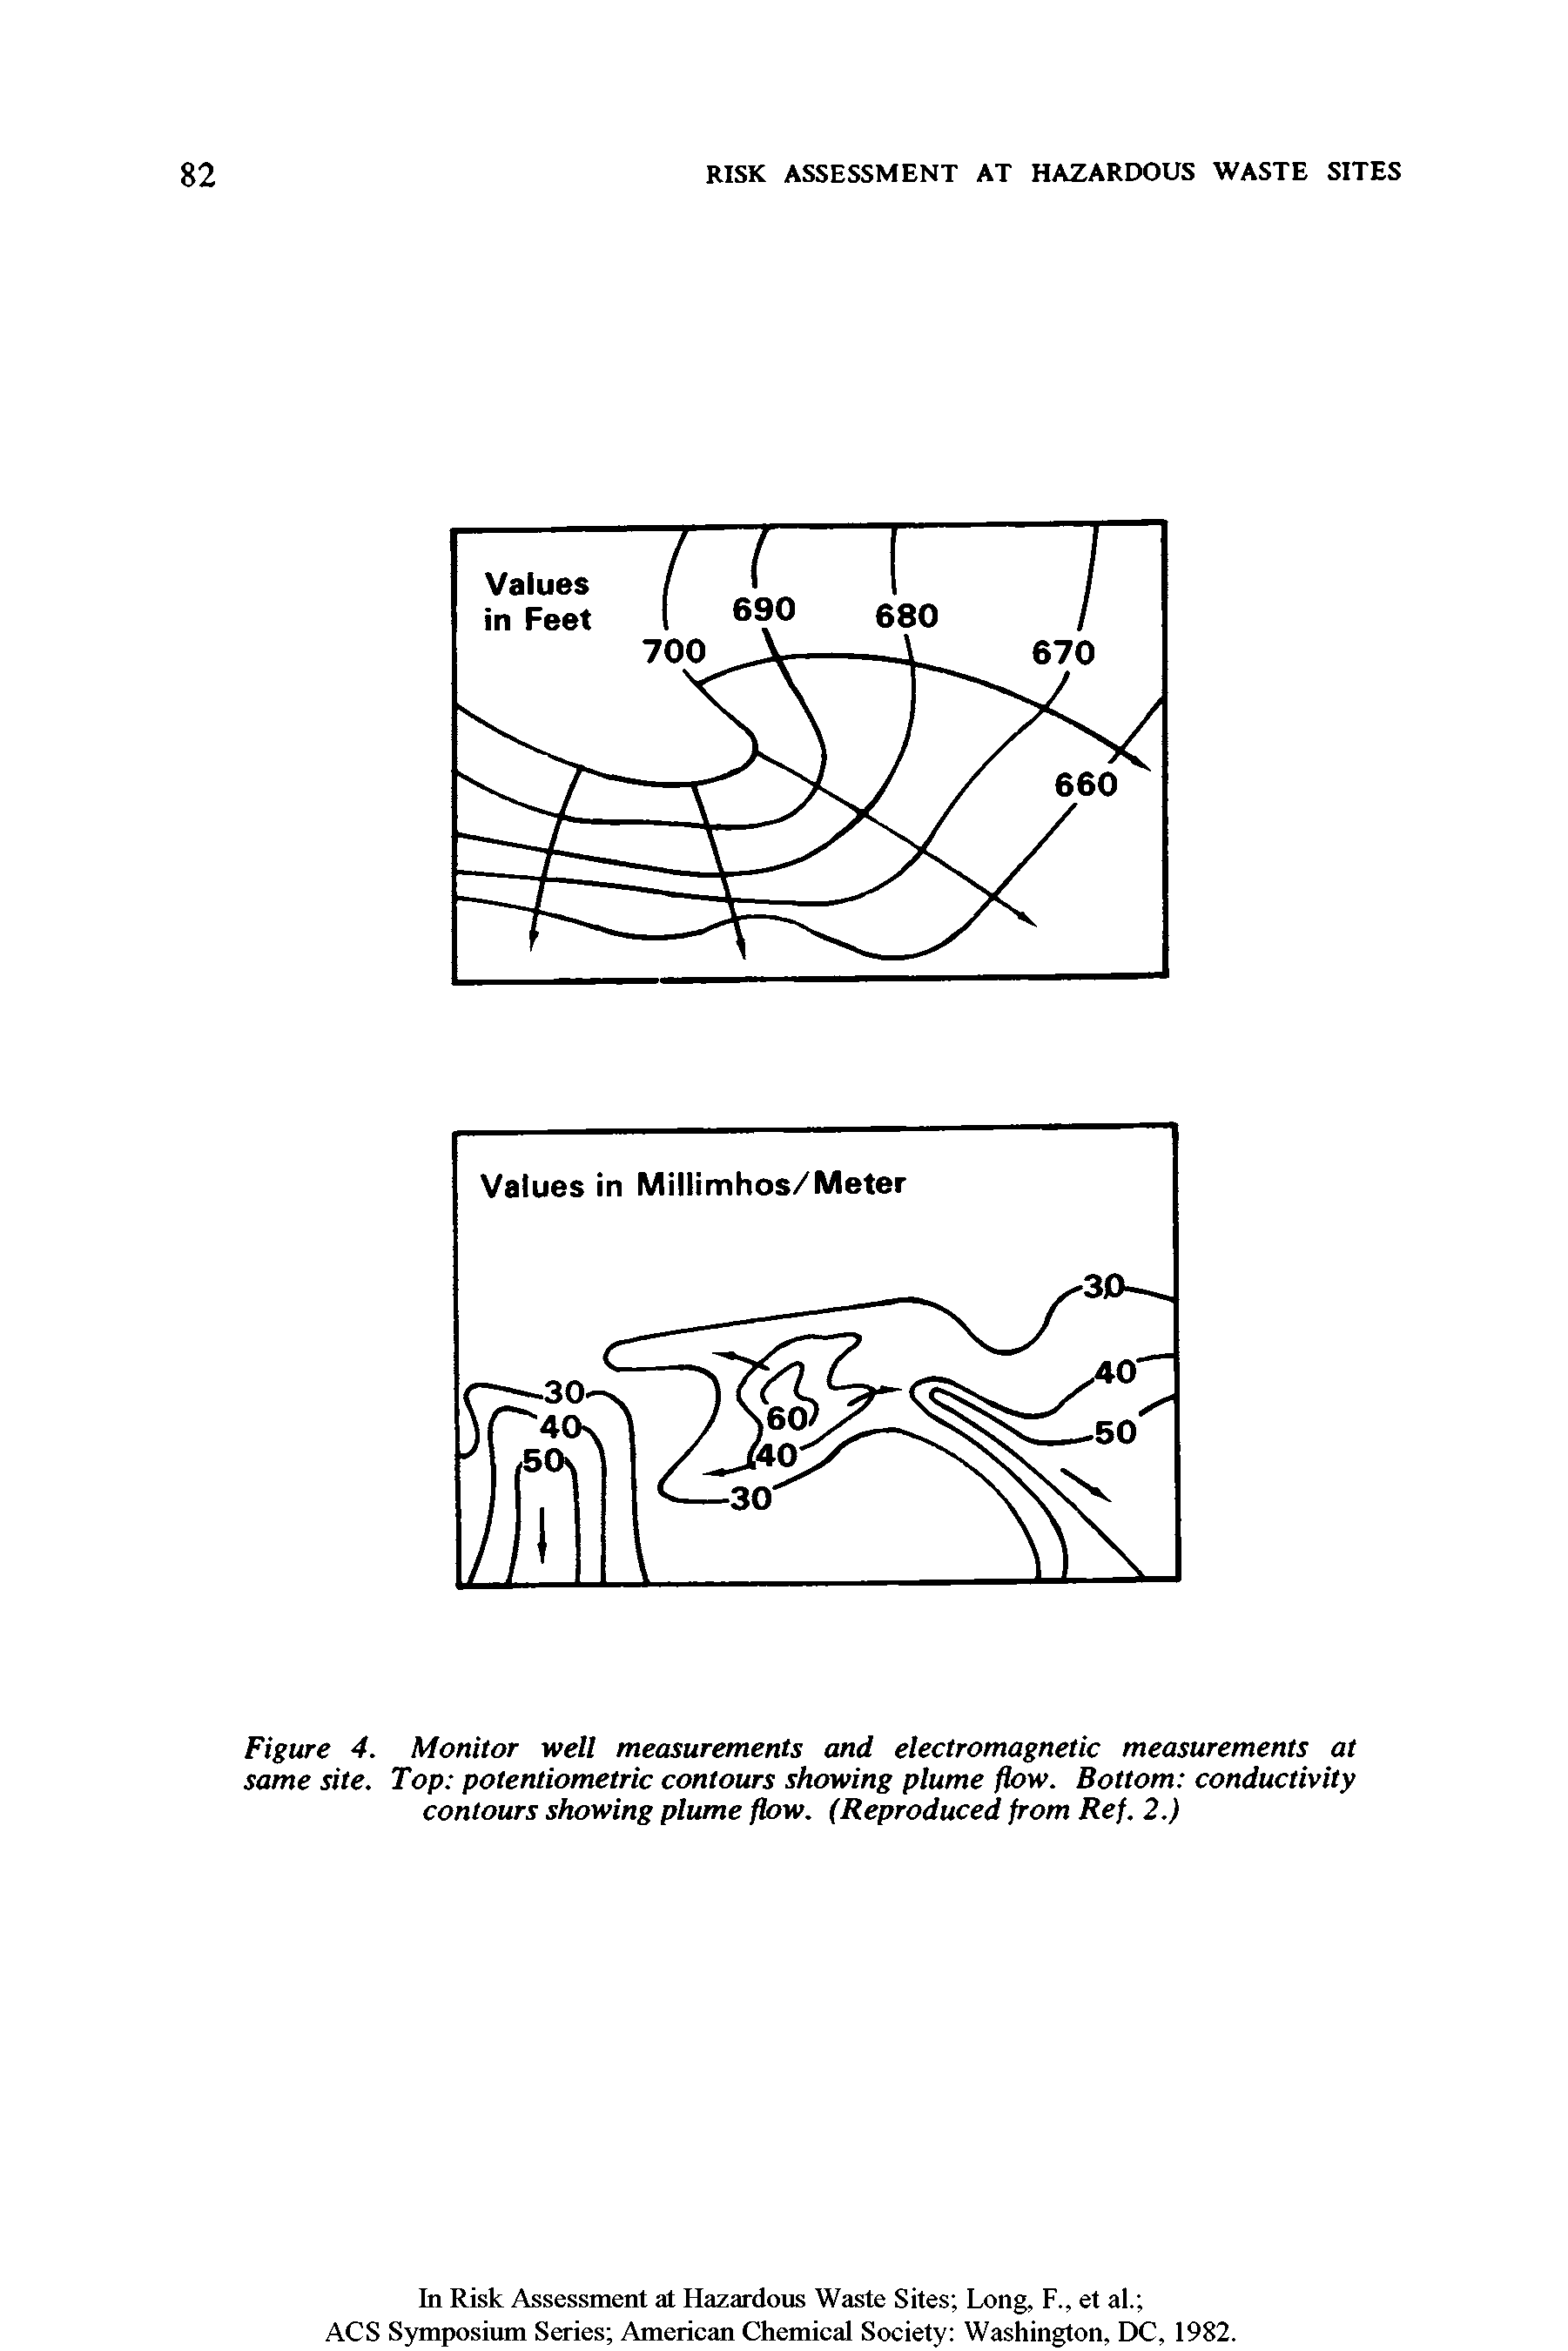 Figure 4. Monitor well measurements and electromagnetic measurements at same site. Top potentiometric contours showing plume flow. Bottom conductivity contours showing plume flow. (Reproduced from Ref. 2.)...